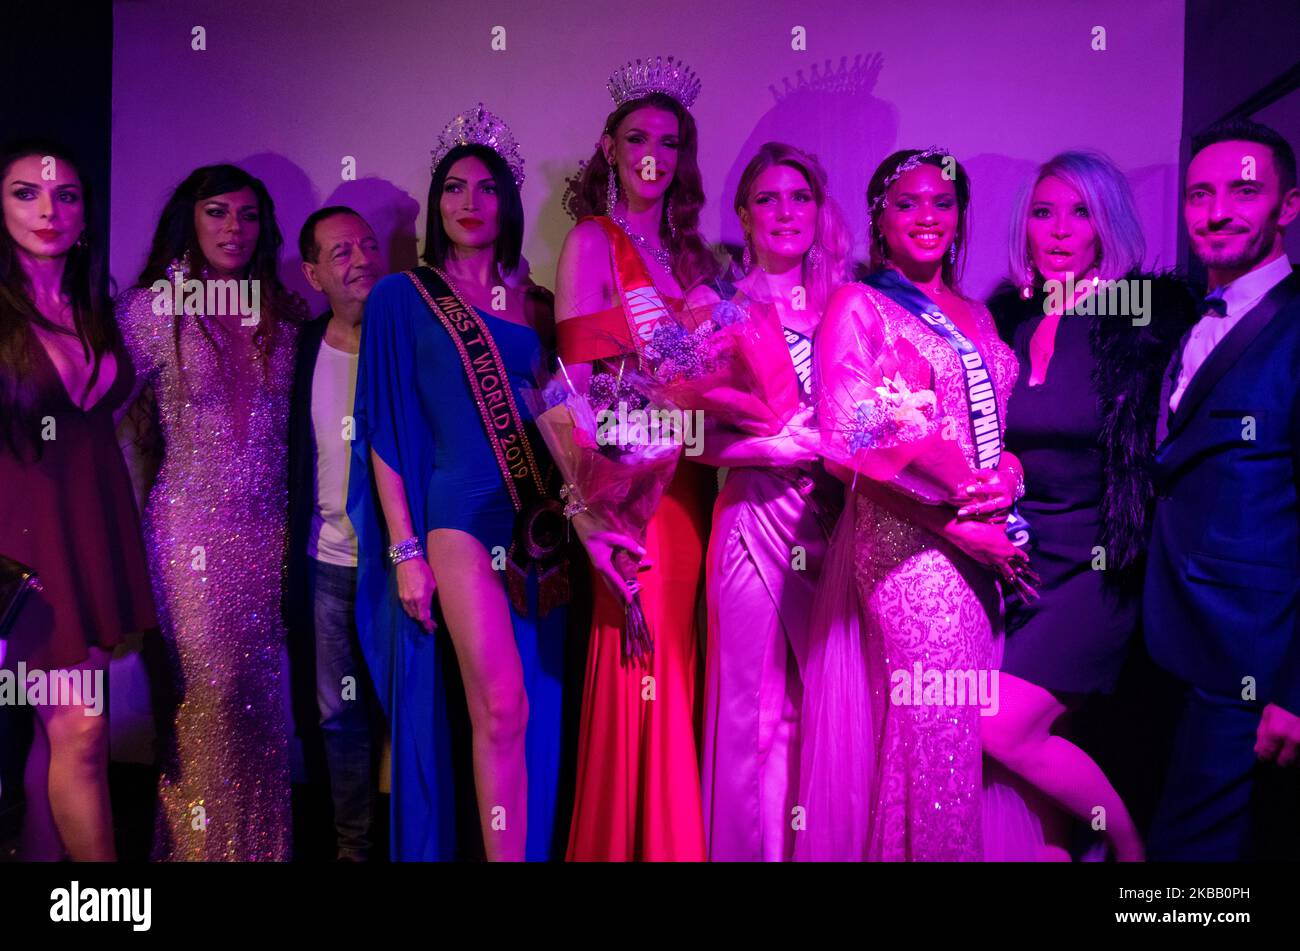 Thursday, November 14, 2019, was held in Paris, France the election of Miss T France 2019, contest of beauty and elegance reserved for transgender women. (Photo by Estelle Ruiz/NurPhoto) Stock Photo